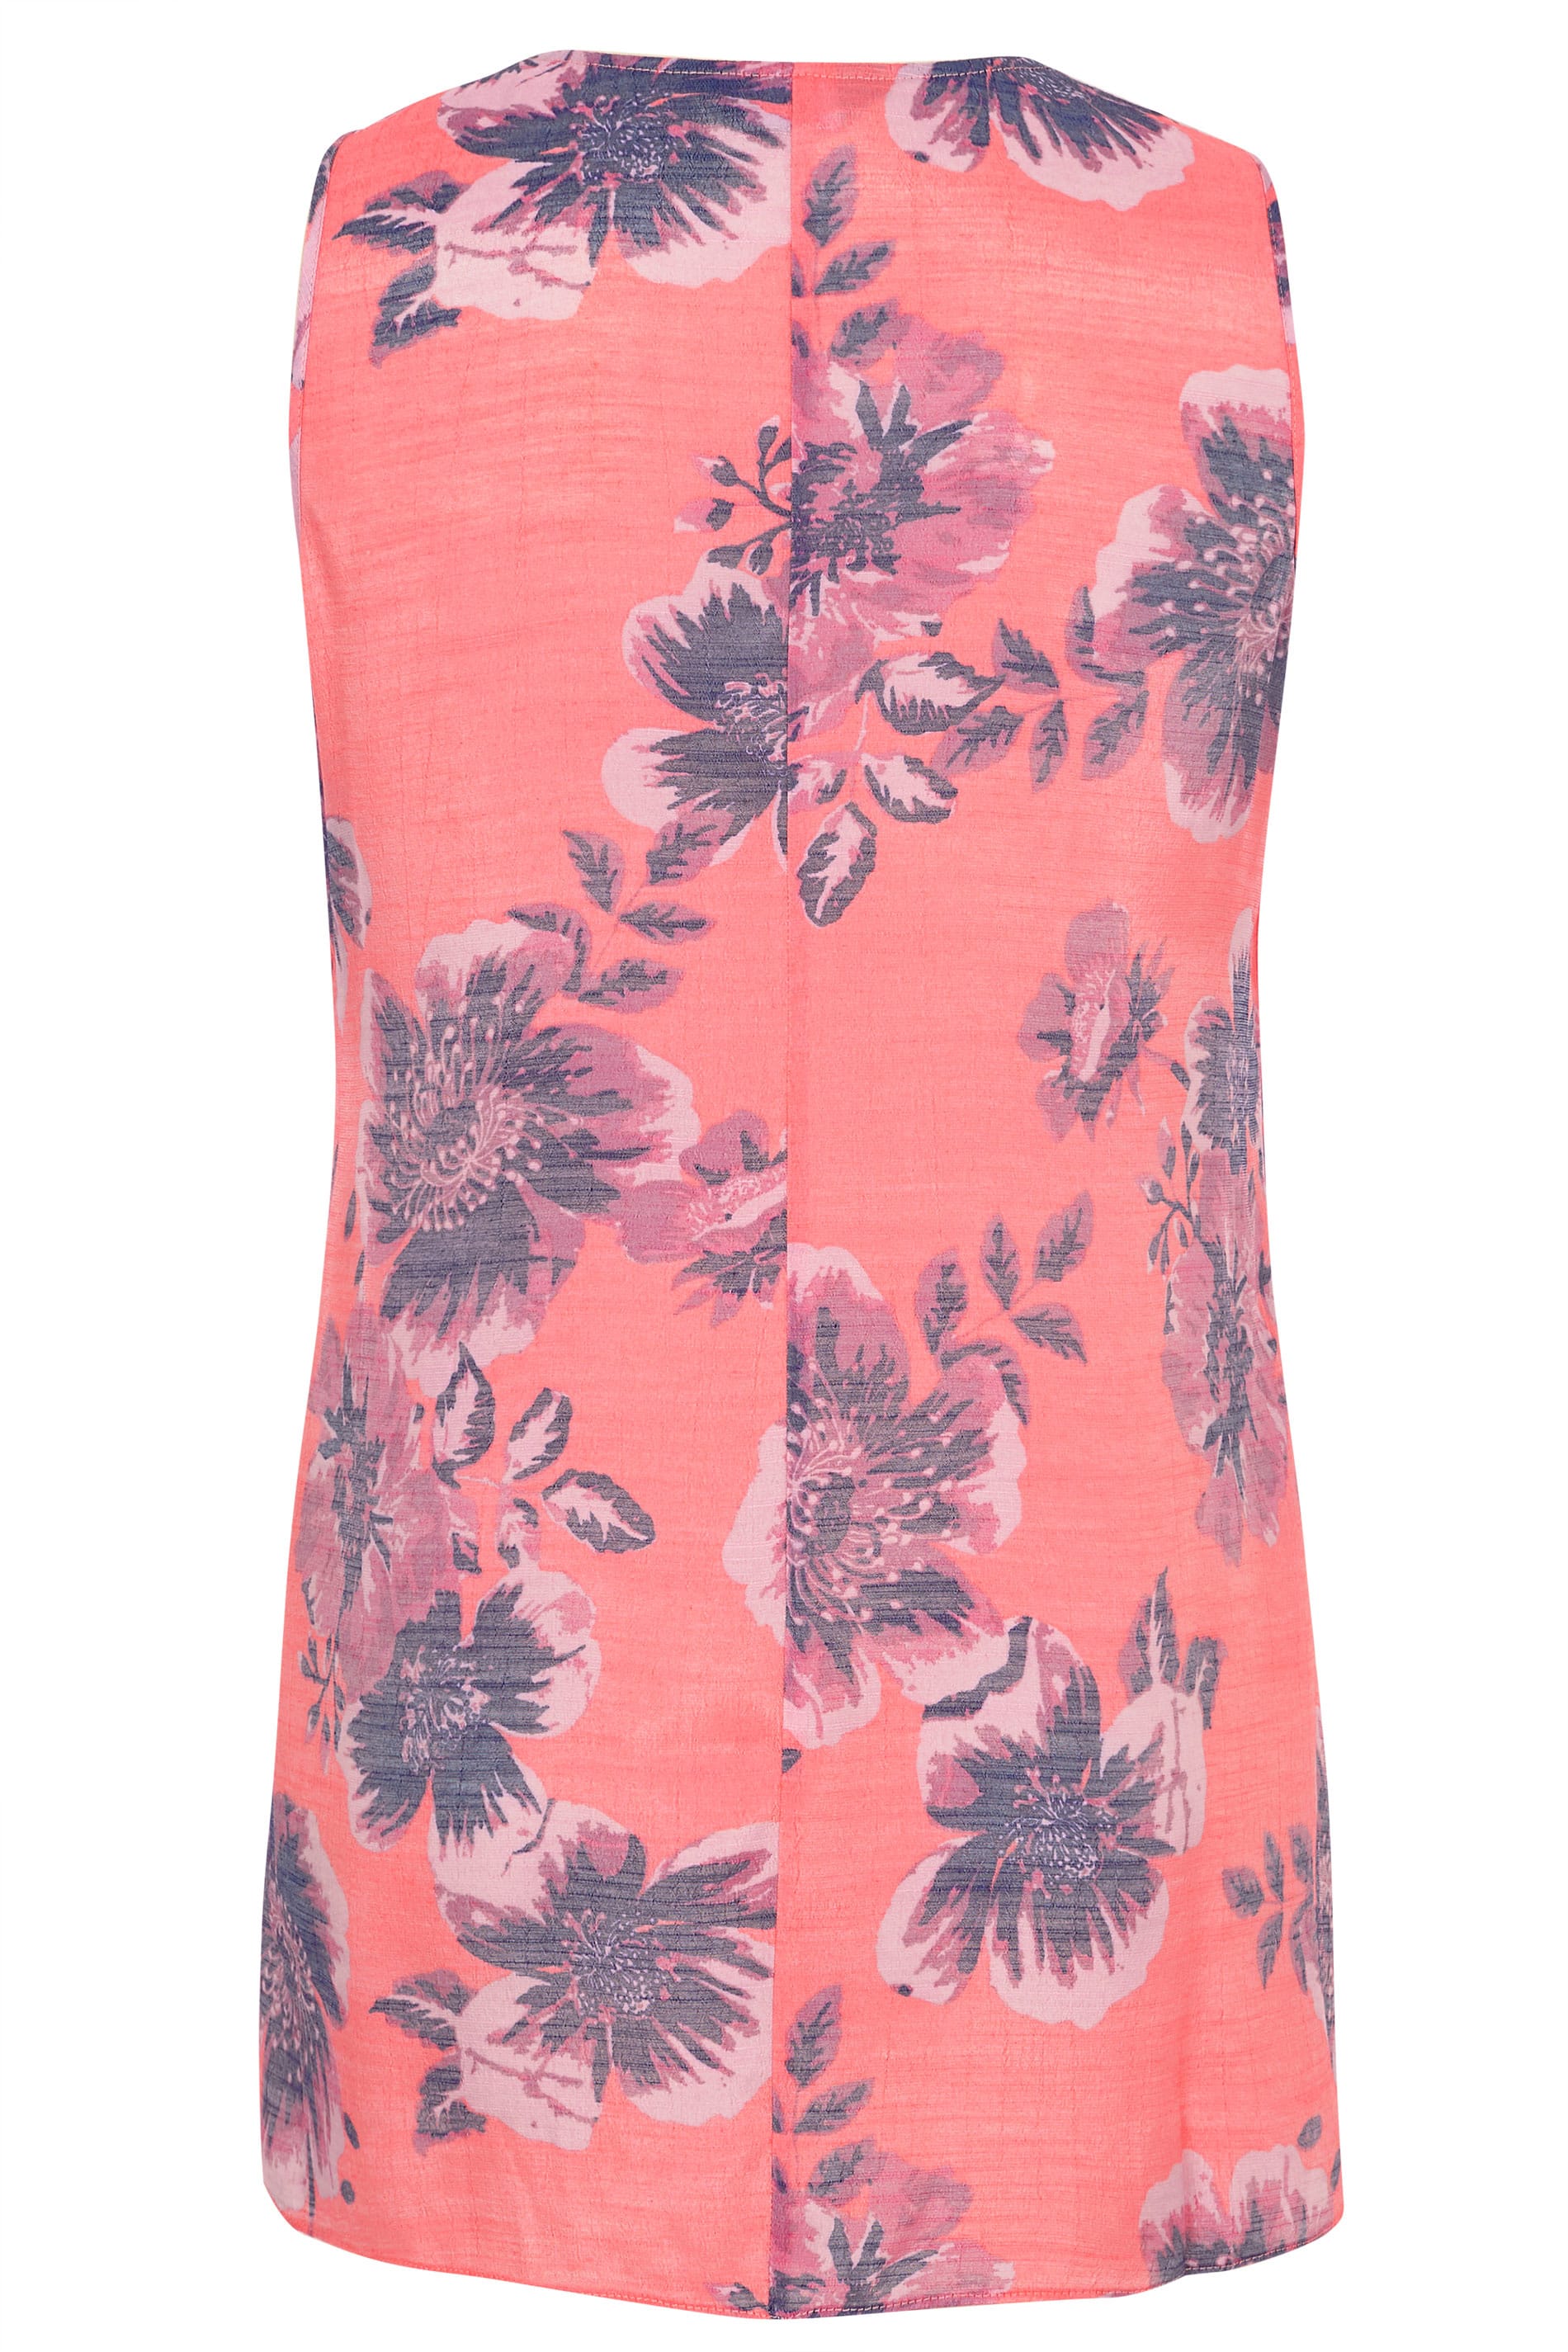 Coral Floral Layered Sleeveless Blouse | Plus Sizes 16 to 36 | Yours ...